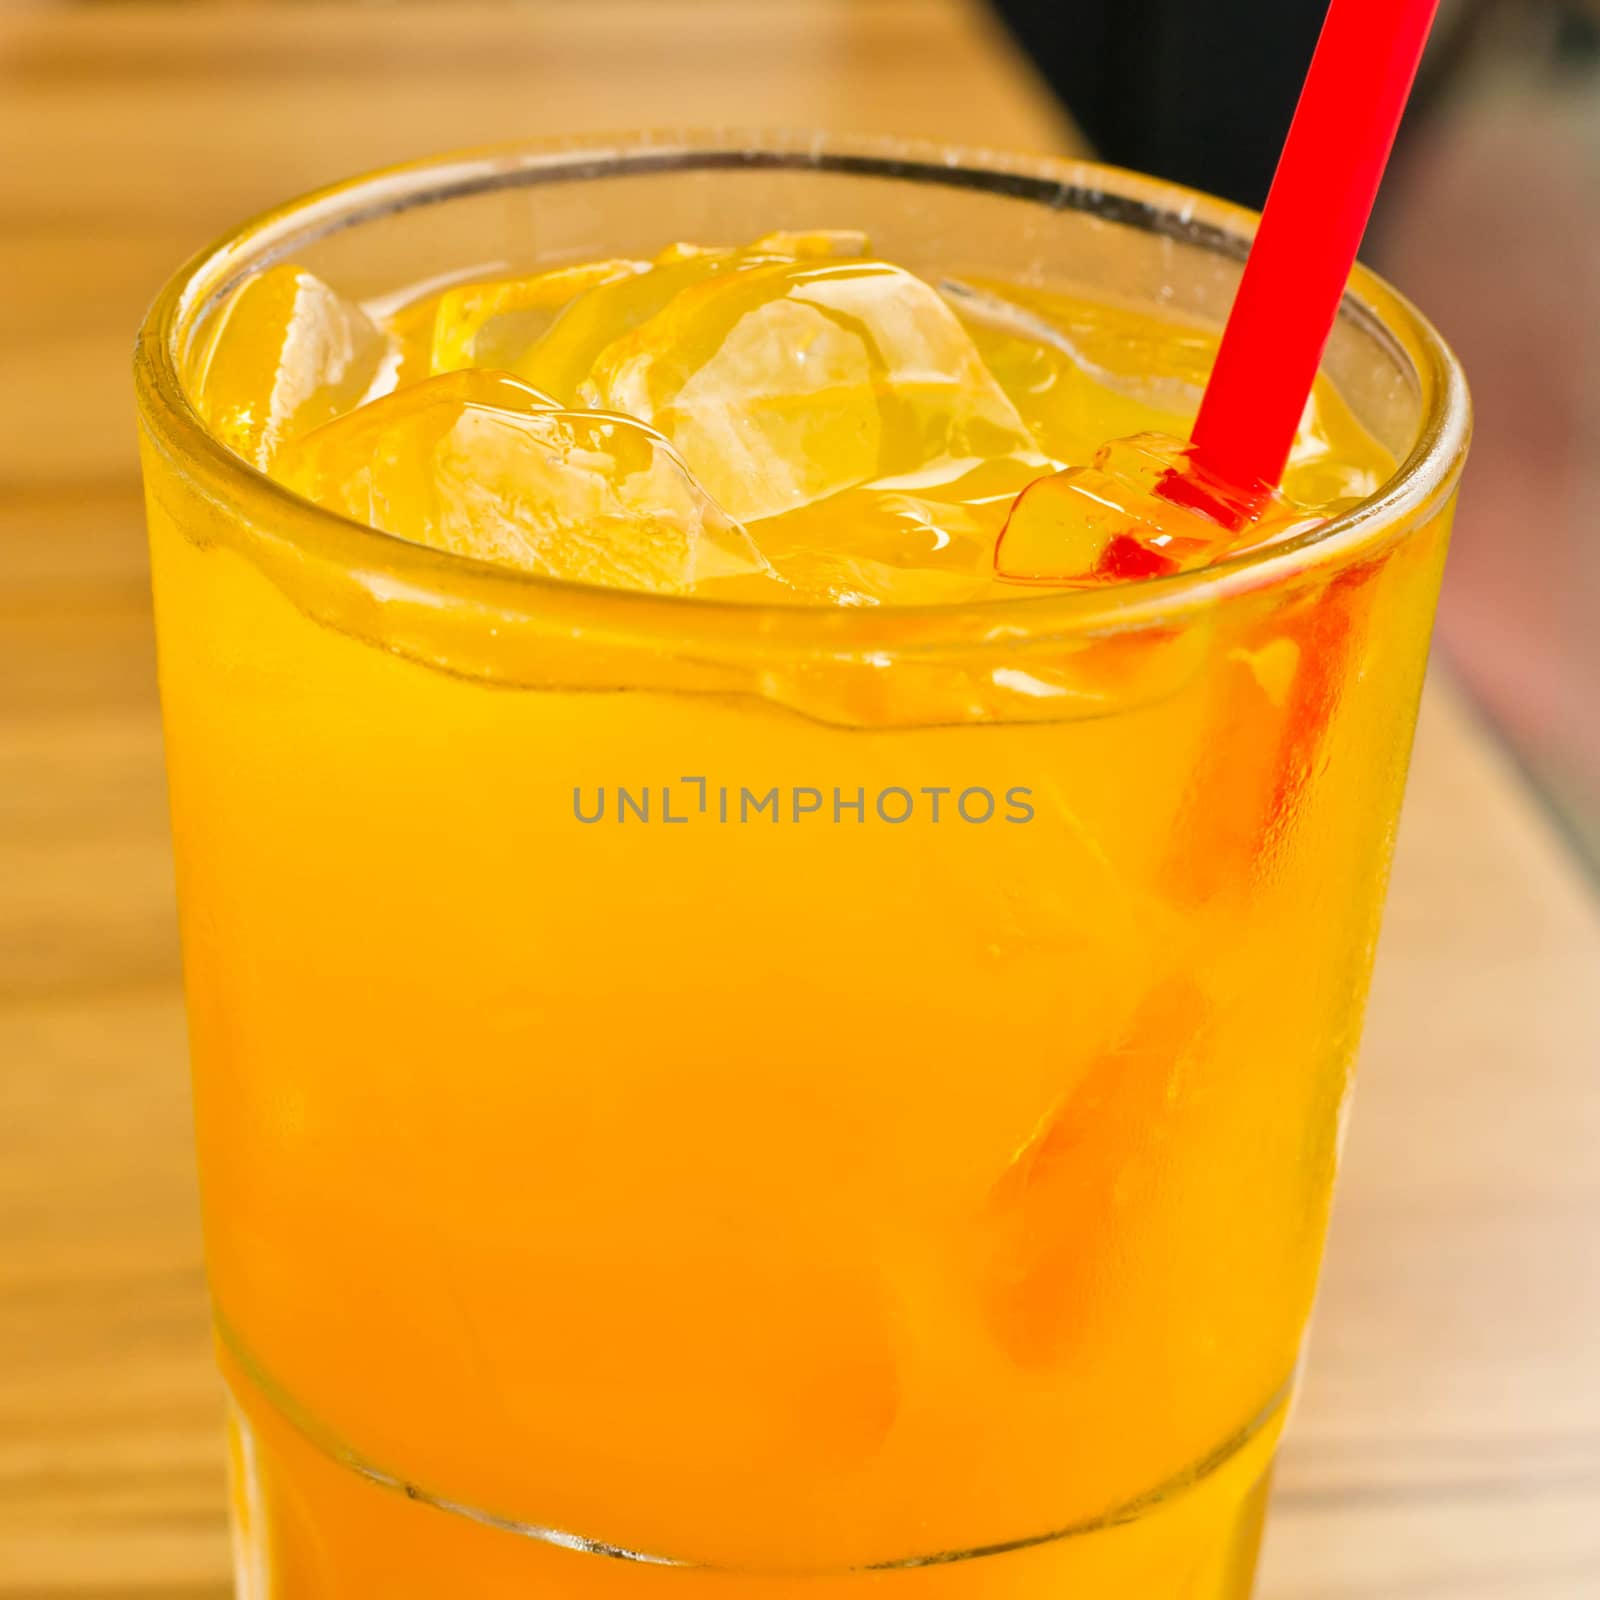 Orange juice with ice  in a glass place on the table 